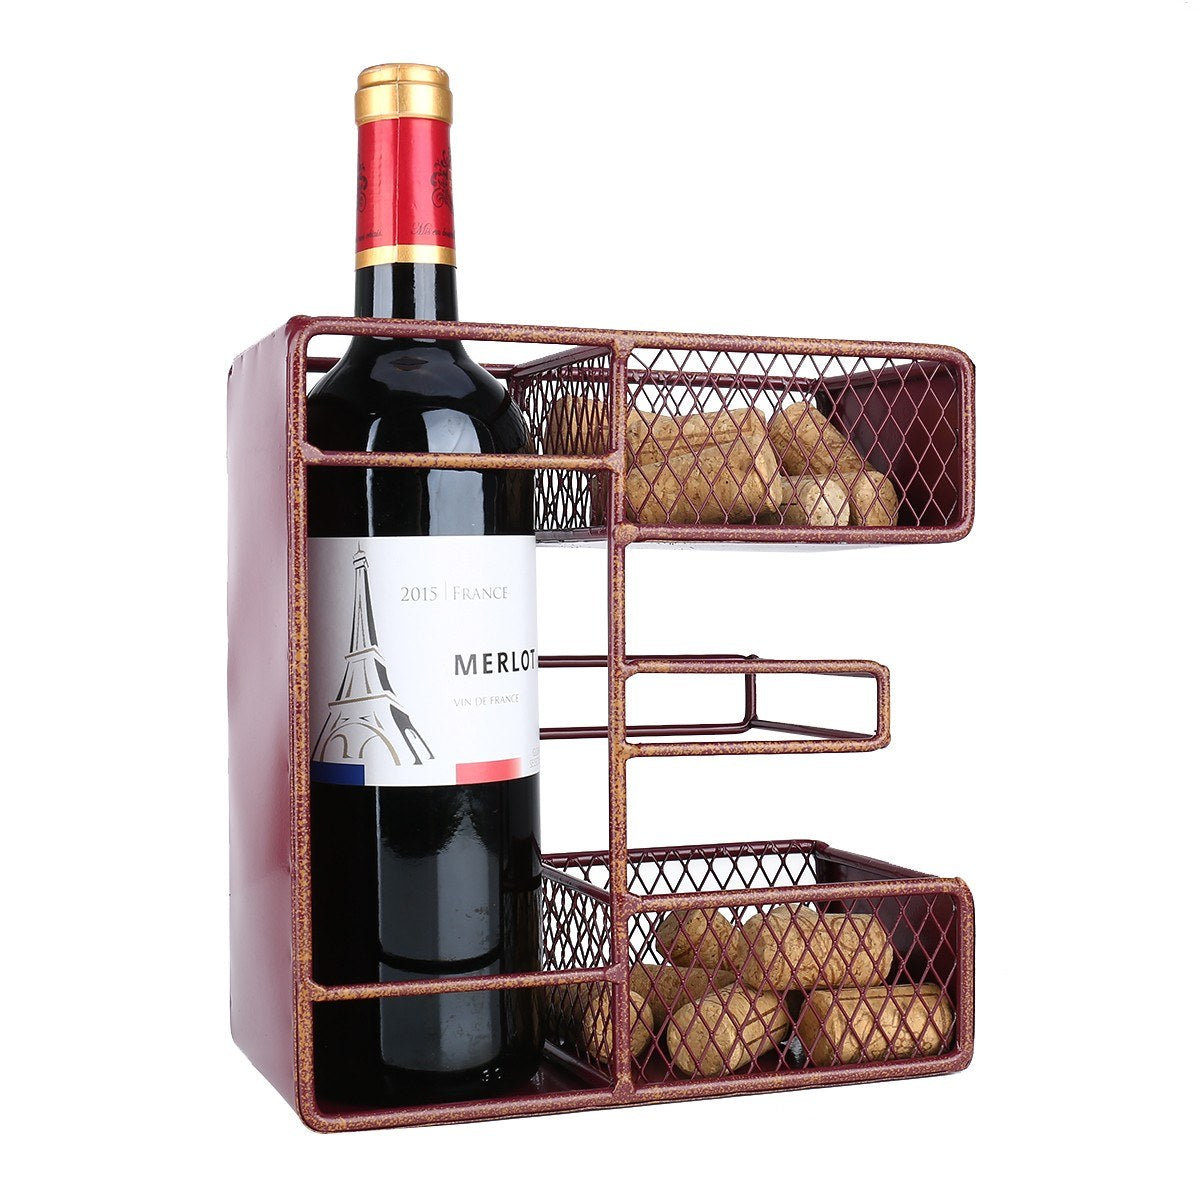 Letter "E" looks great on your table as a wine bottle holder and cork!